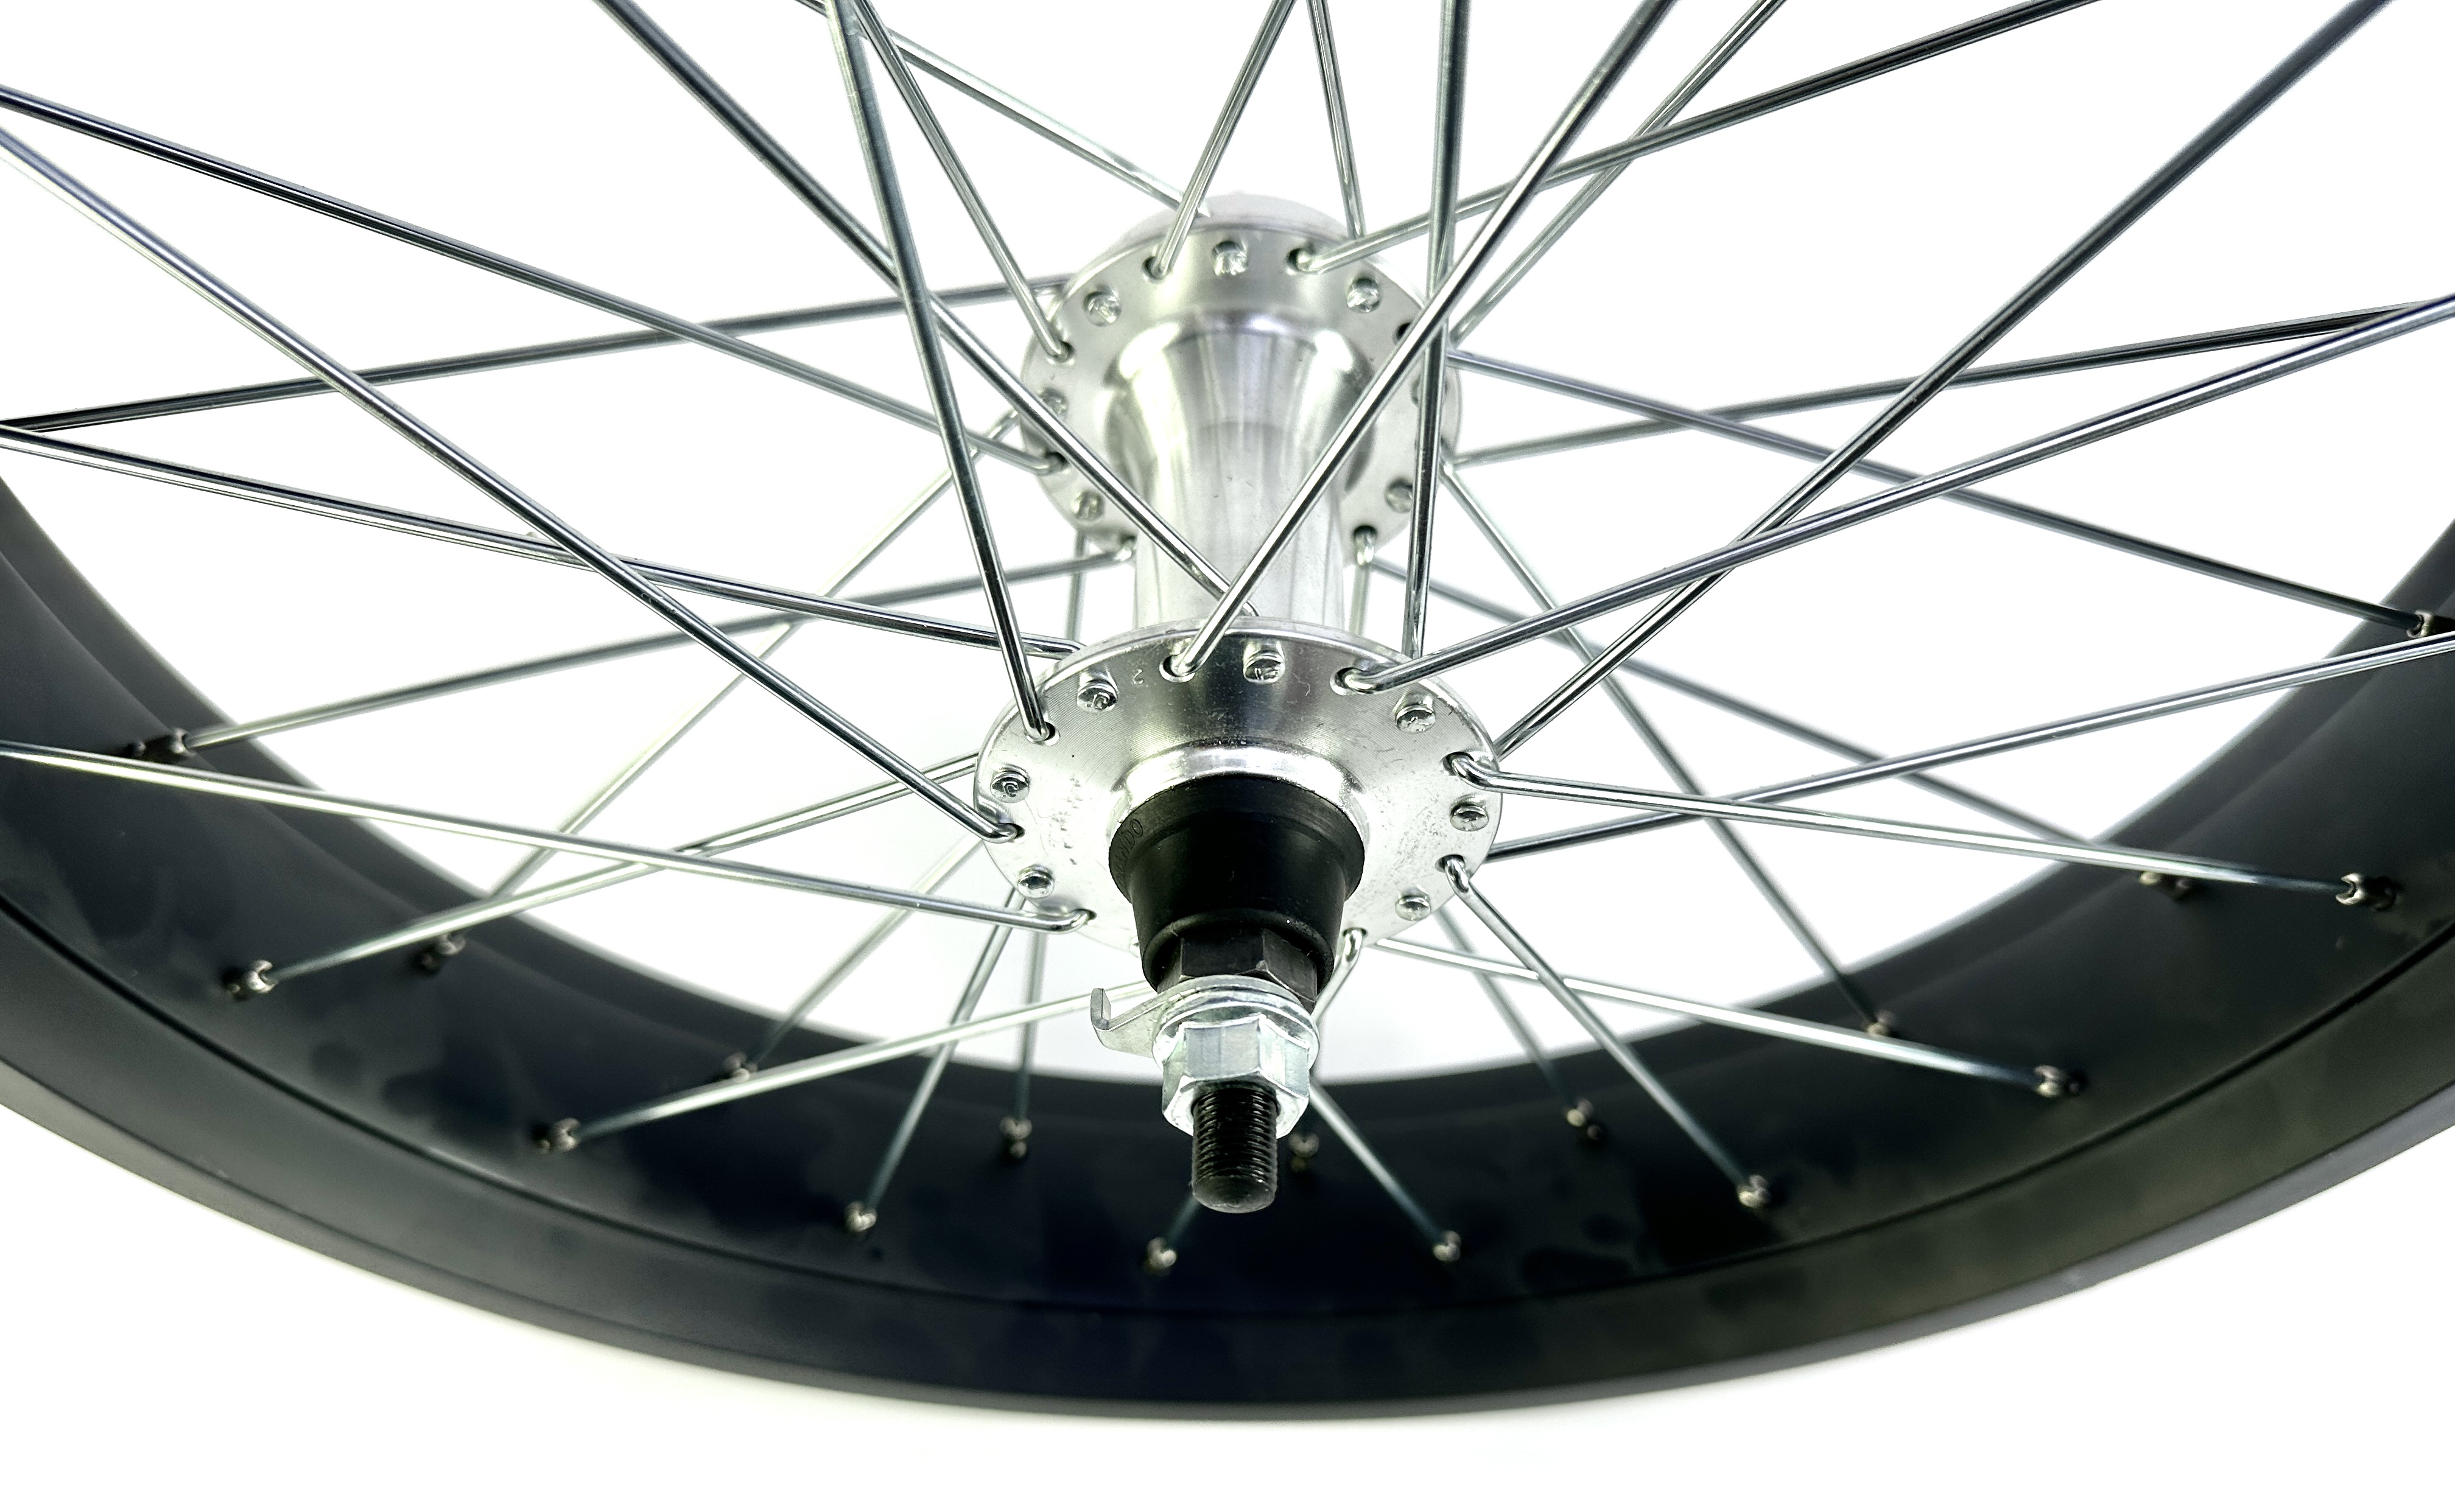 204 Front Wheel  20 x 4 inch Fat Bike 80 mm black for Disk silver Hub, 2nd choice